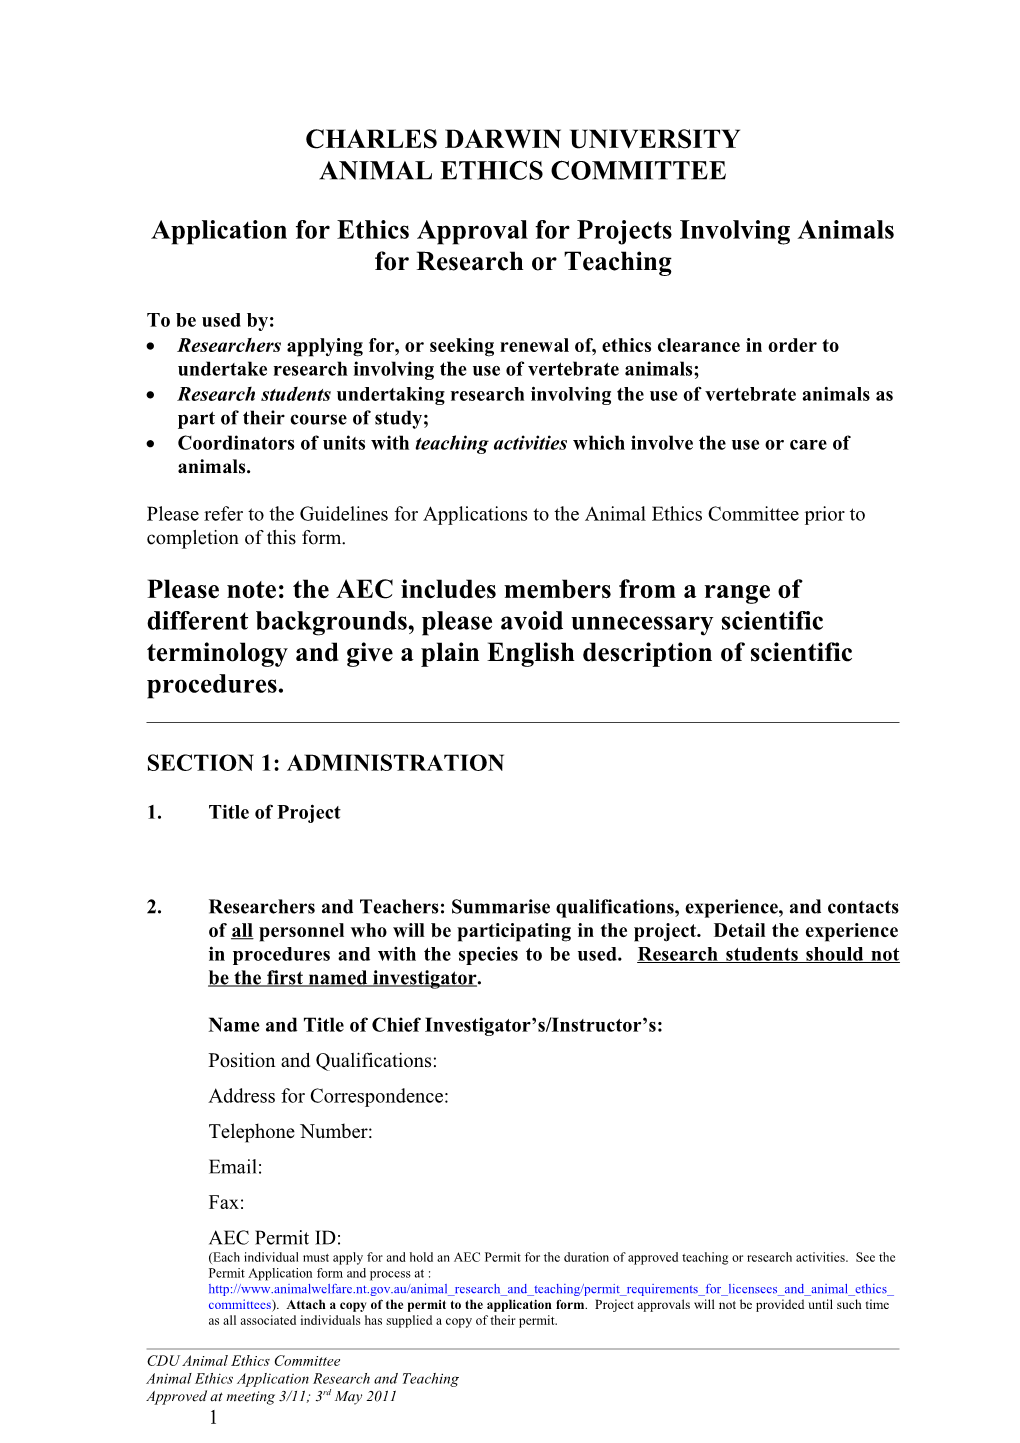 Application for Ethics Approval for Projects Involving Animals for Research Or Teaching